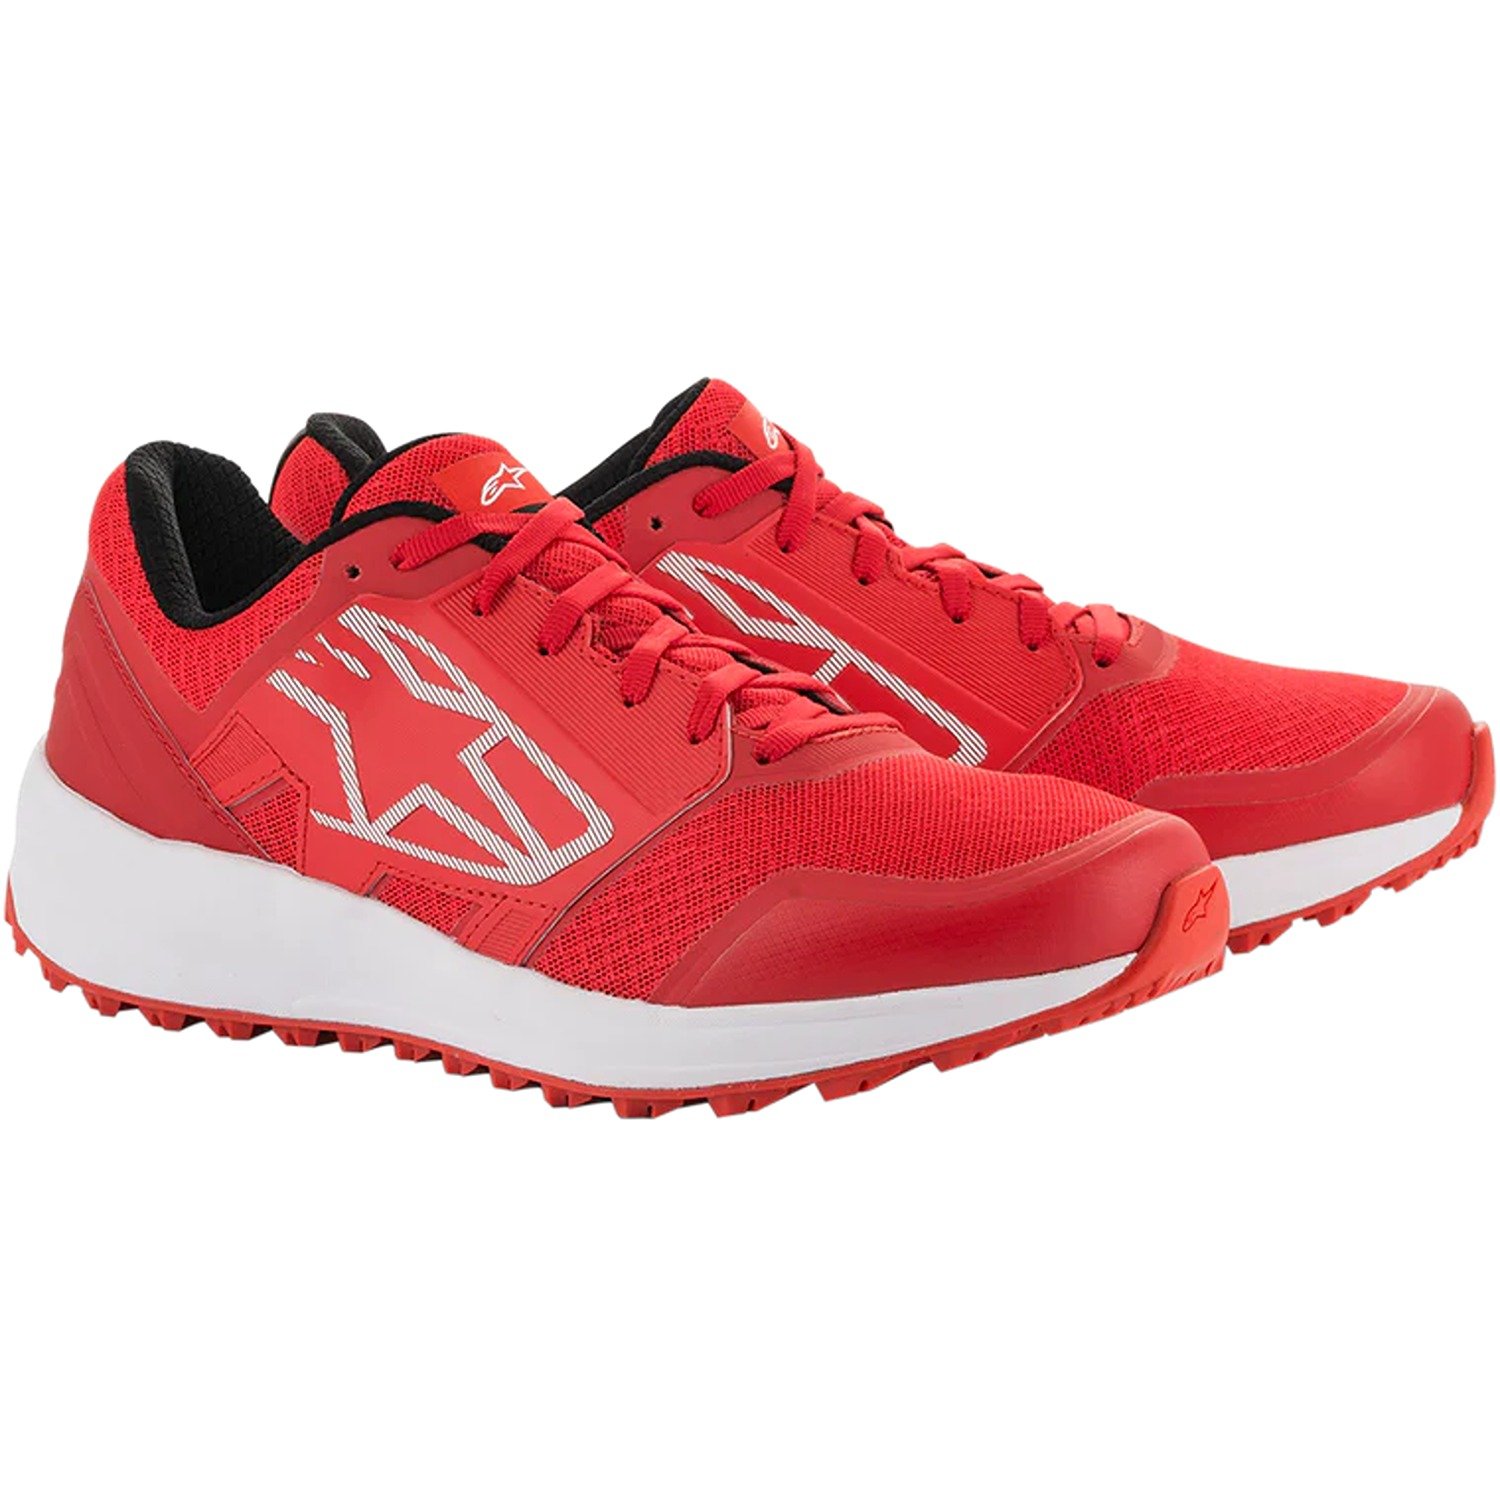 Image of Alpinestars Meta Trail Shoes Red White Taille US 95